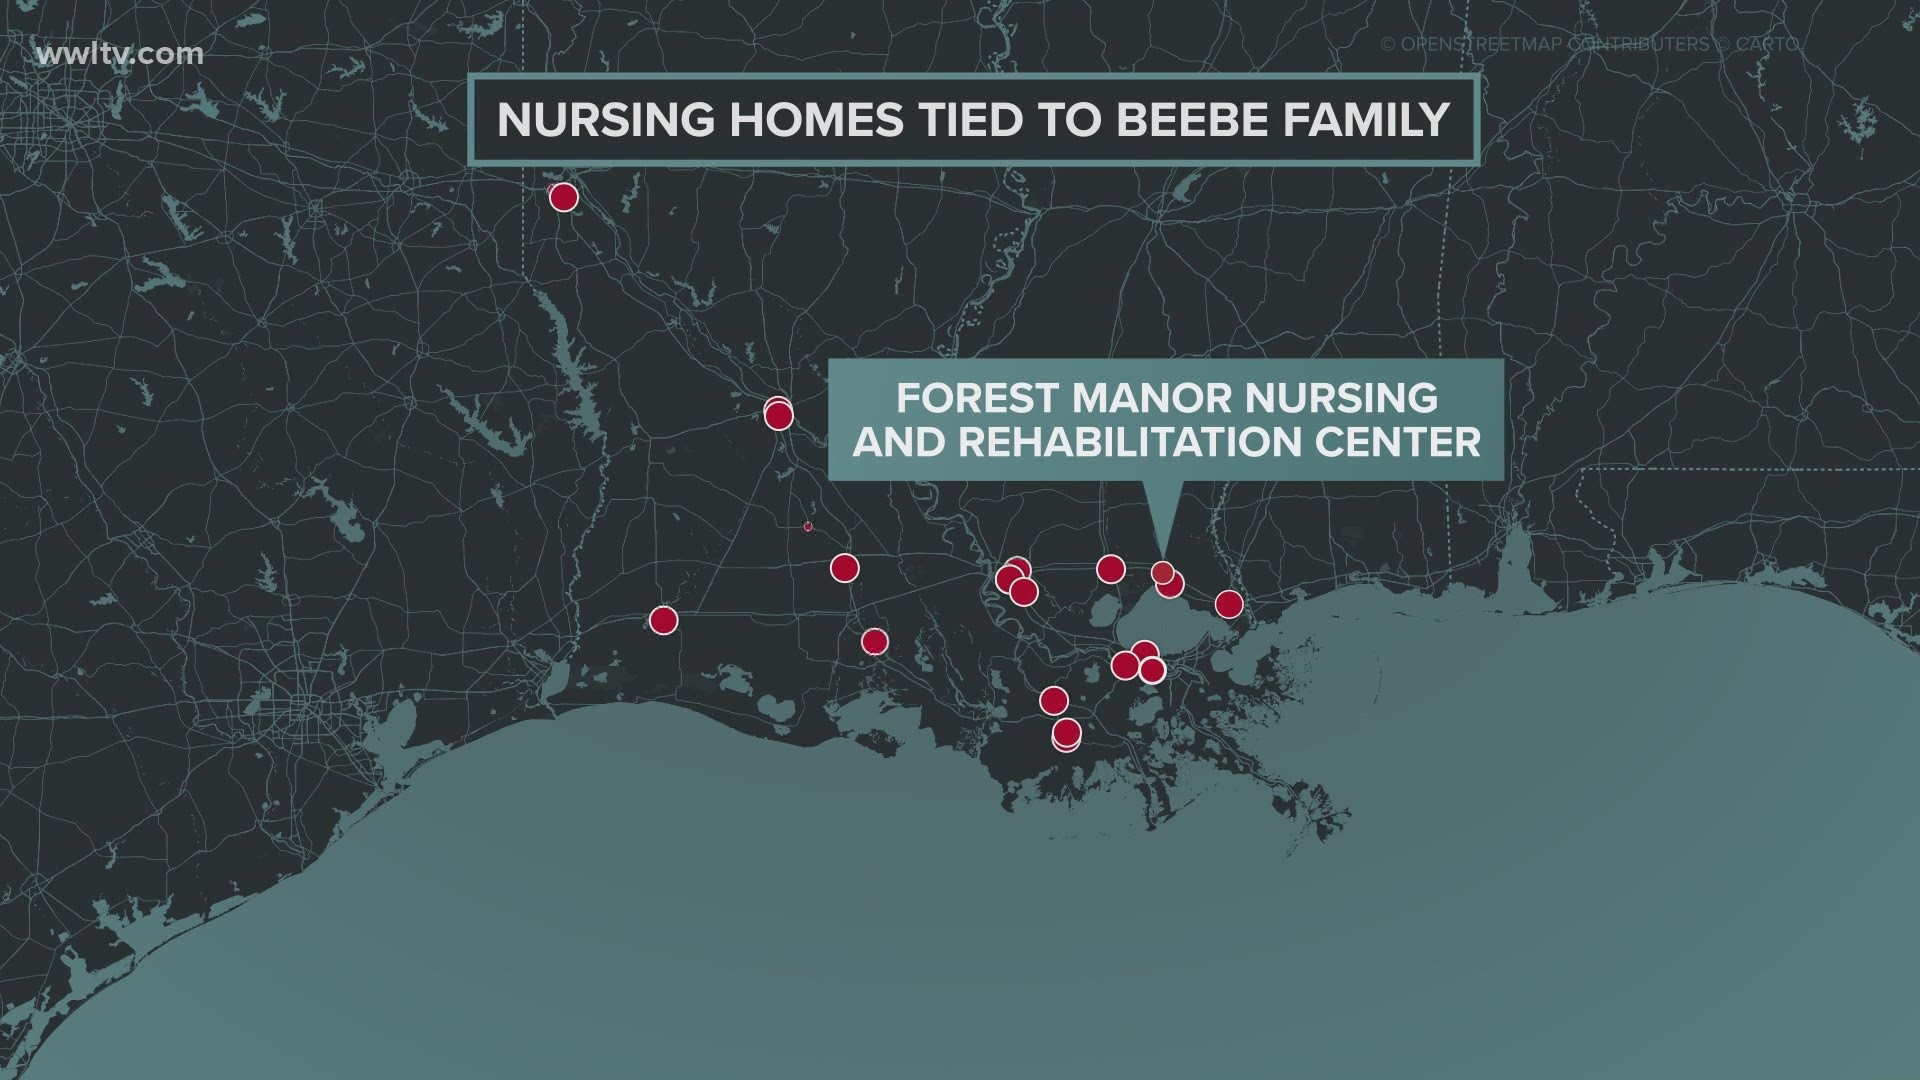 Katie Moore investigates what played a major part in the high number of Covid-19 deaths in nursing homes.